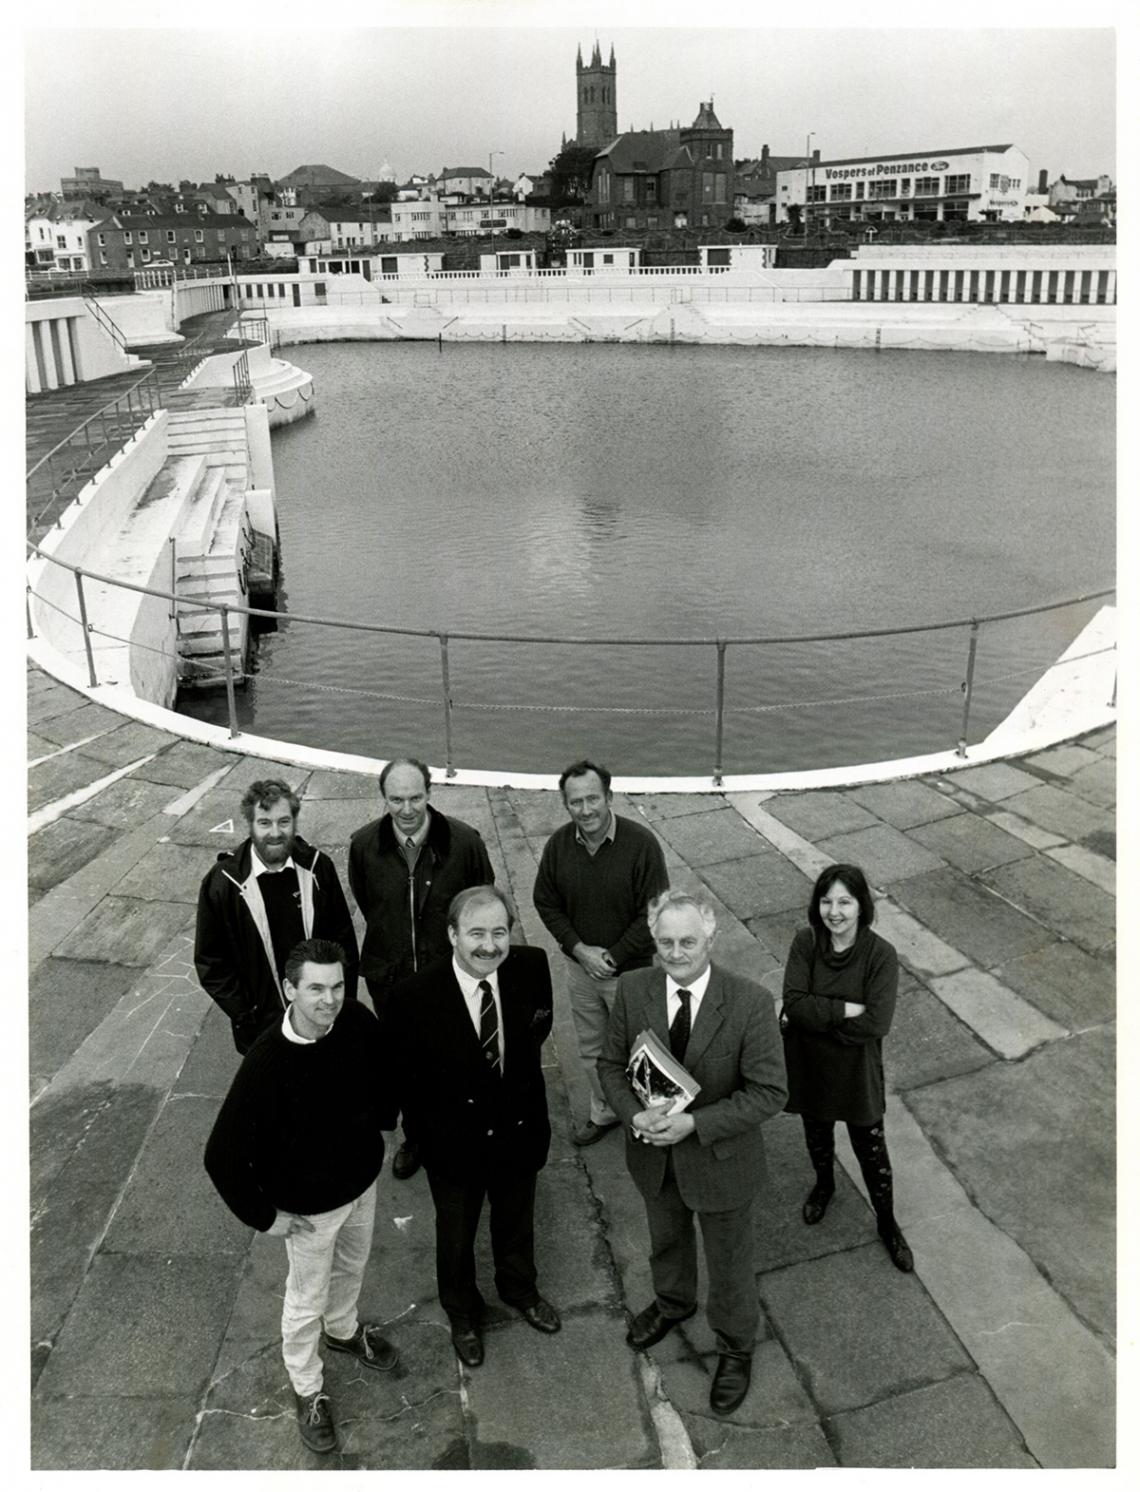 Jubilee Pool's listing and Heritage Lottery funding confirmed